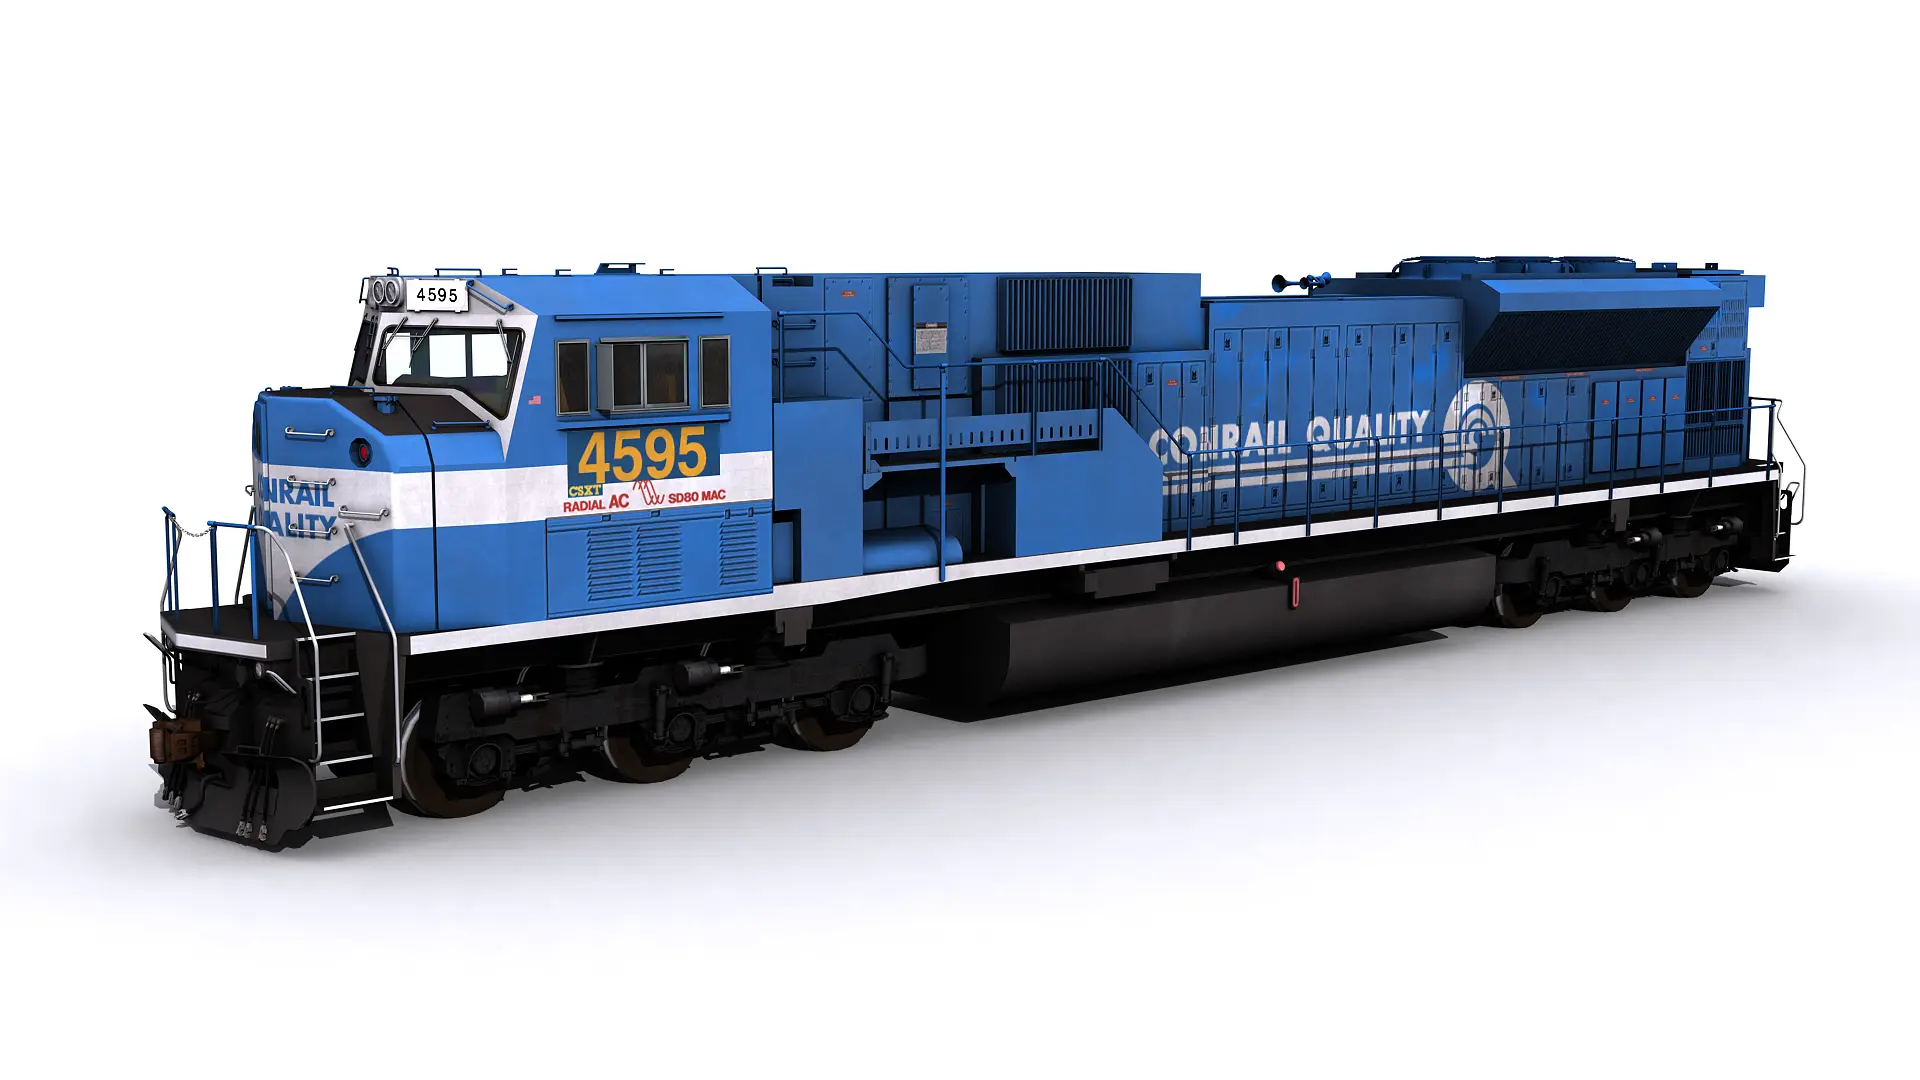 blue engine with white stripes